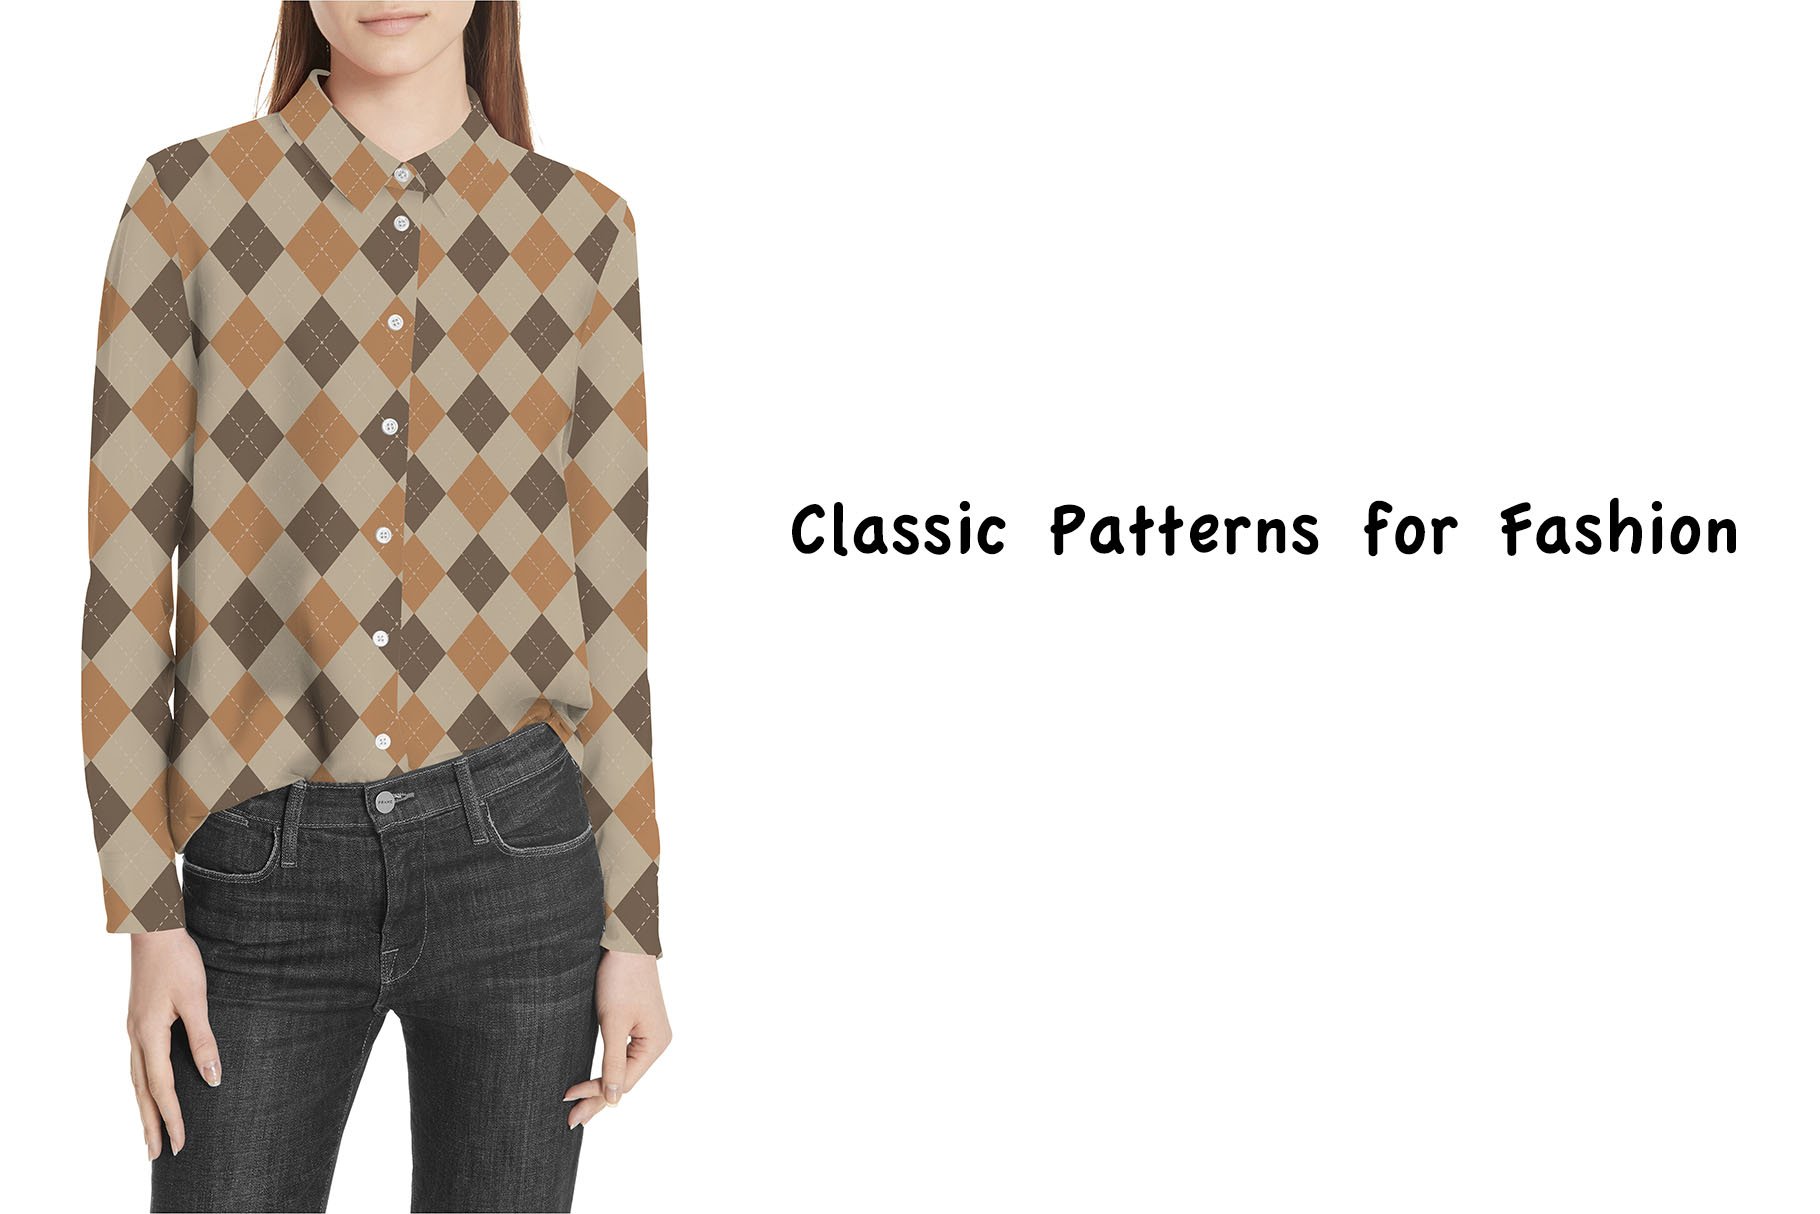 Argyle and Houndstooth Patterns preview image.